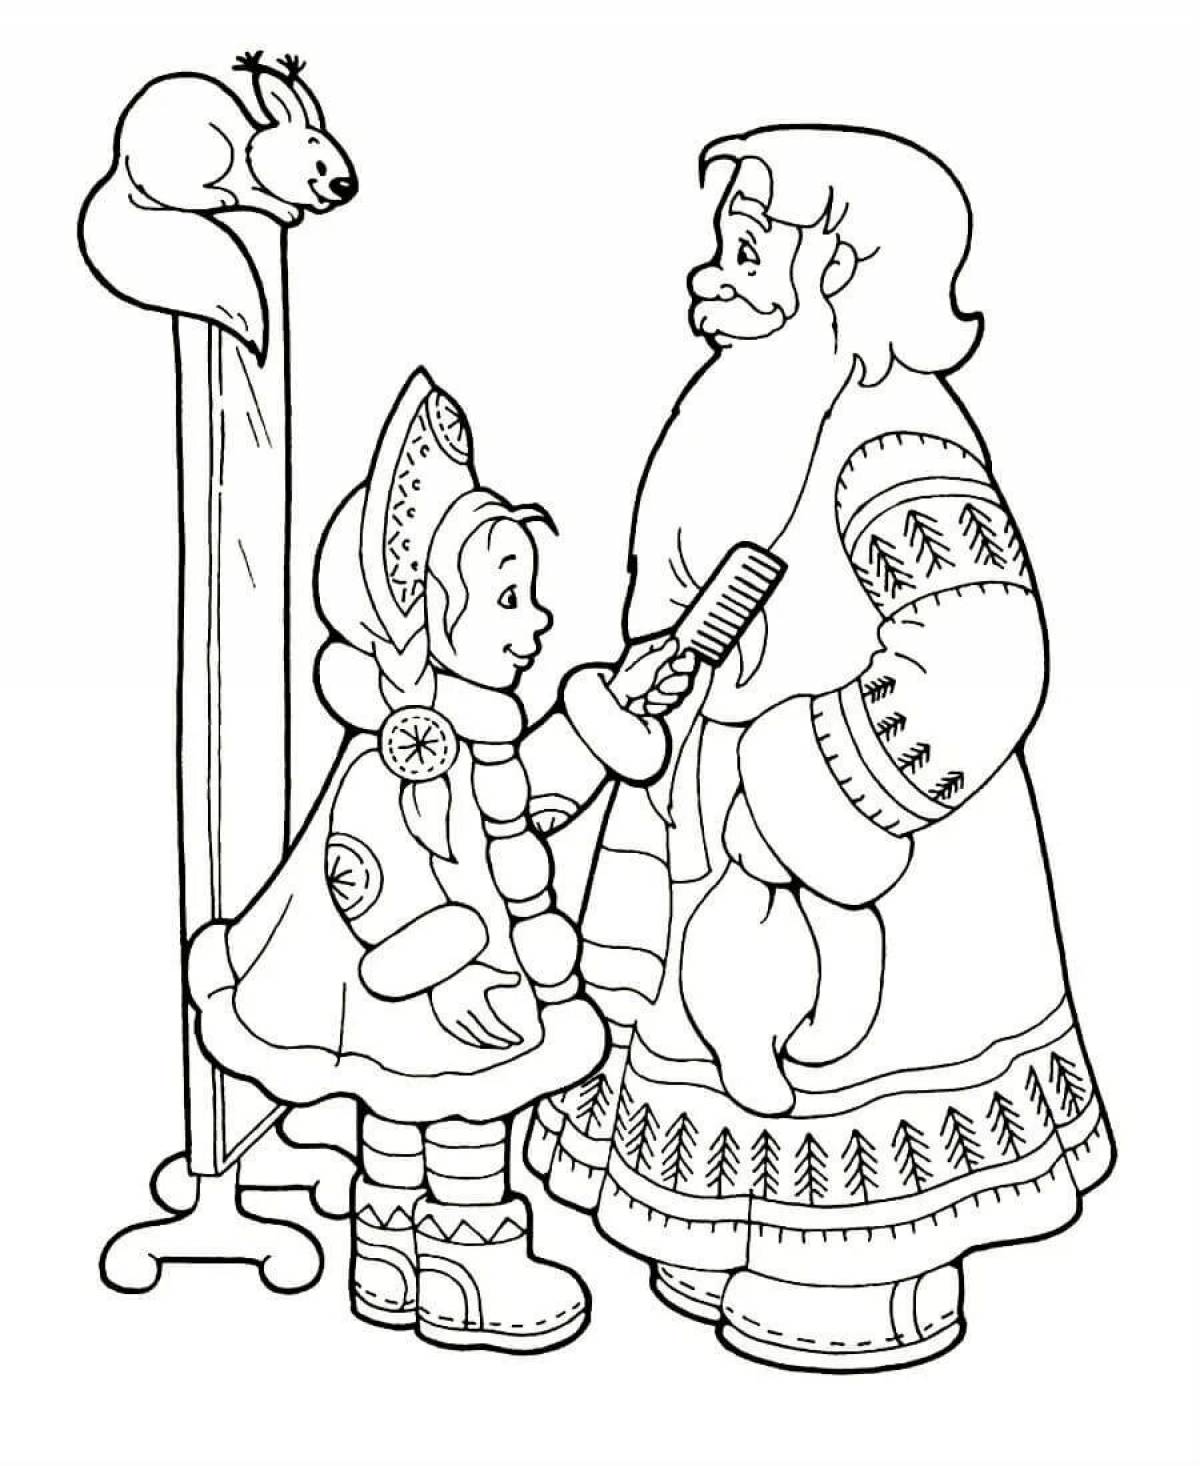 Coloring page charming Santa Claus and Snow Maiden